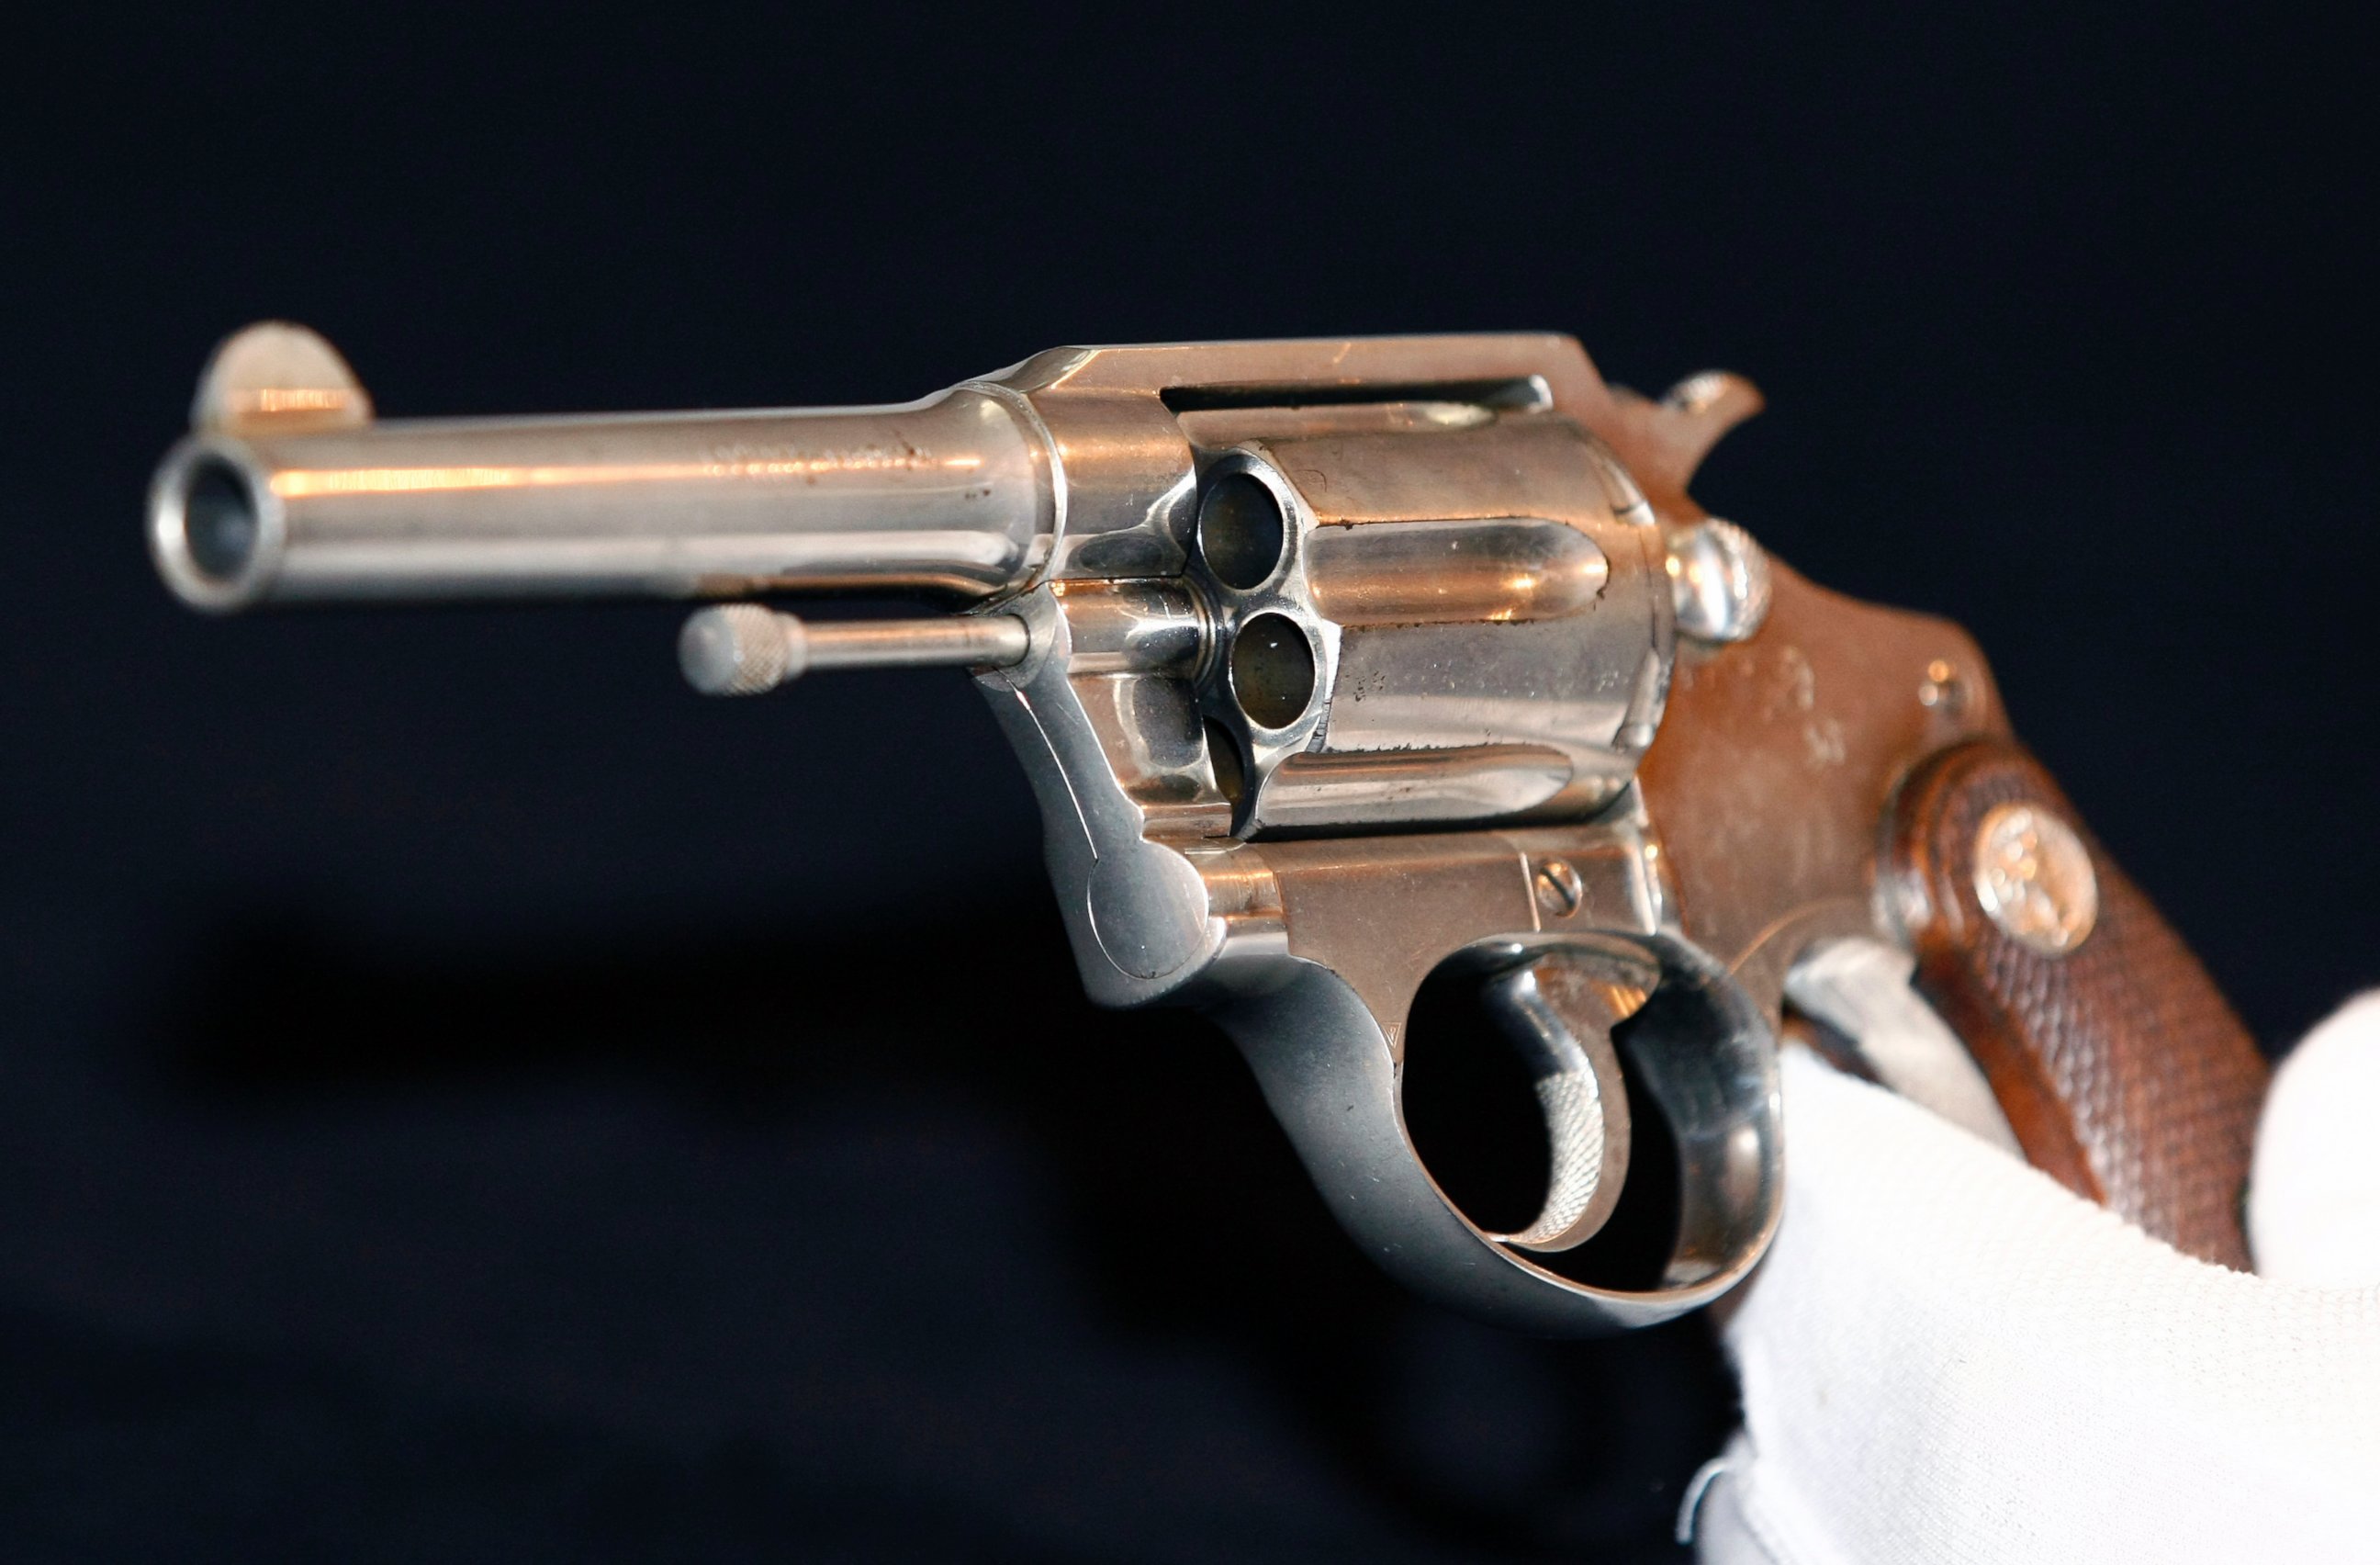 PHOTO: A Colt .38 revolver once owned by notorious gangster "Al" Capone, is displayed at Christie's auction house, London, June 21, 2011.